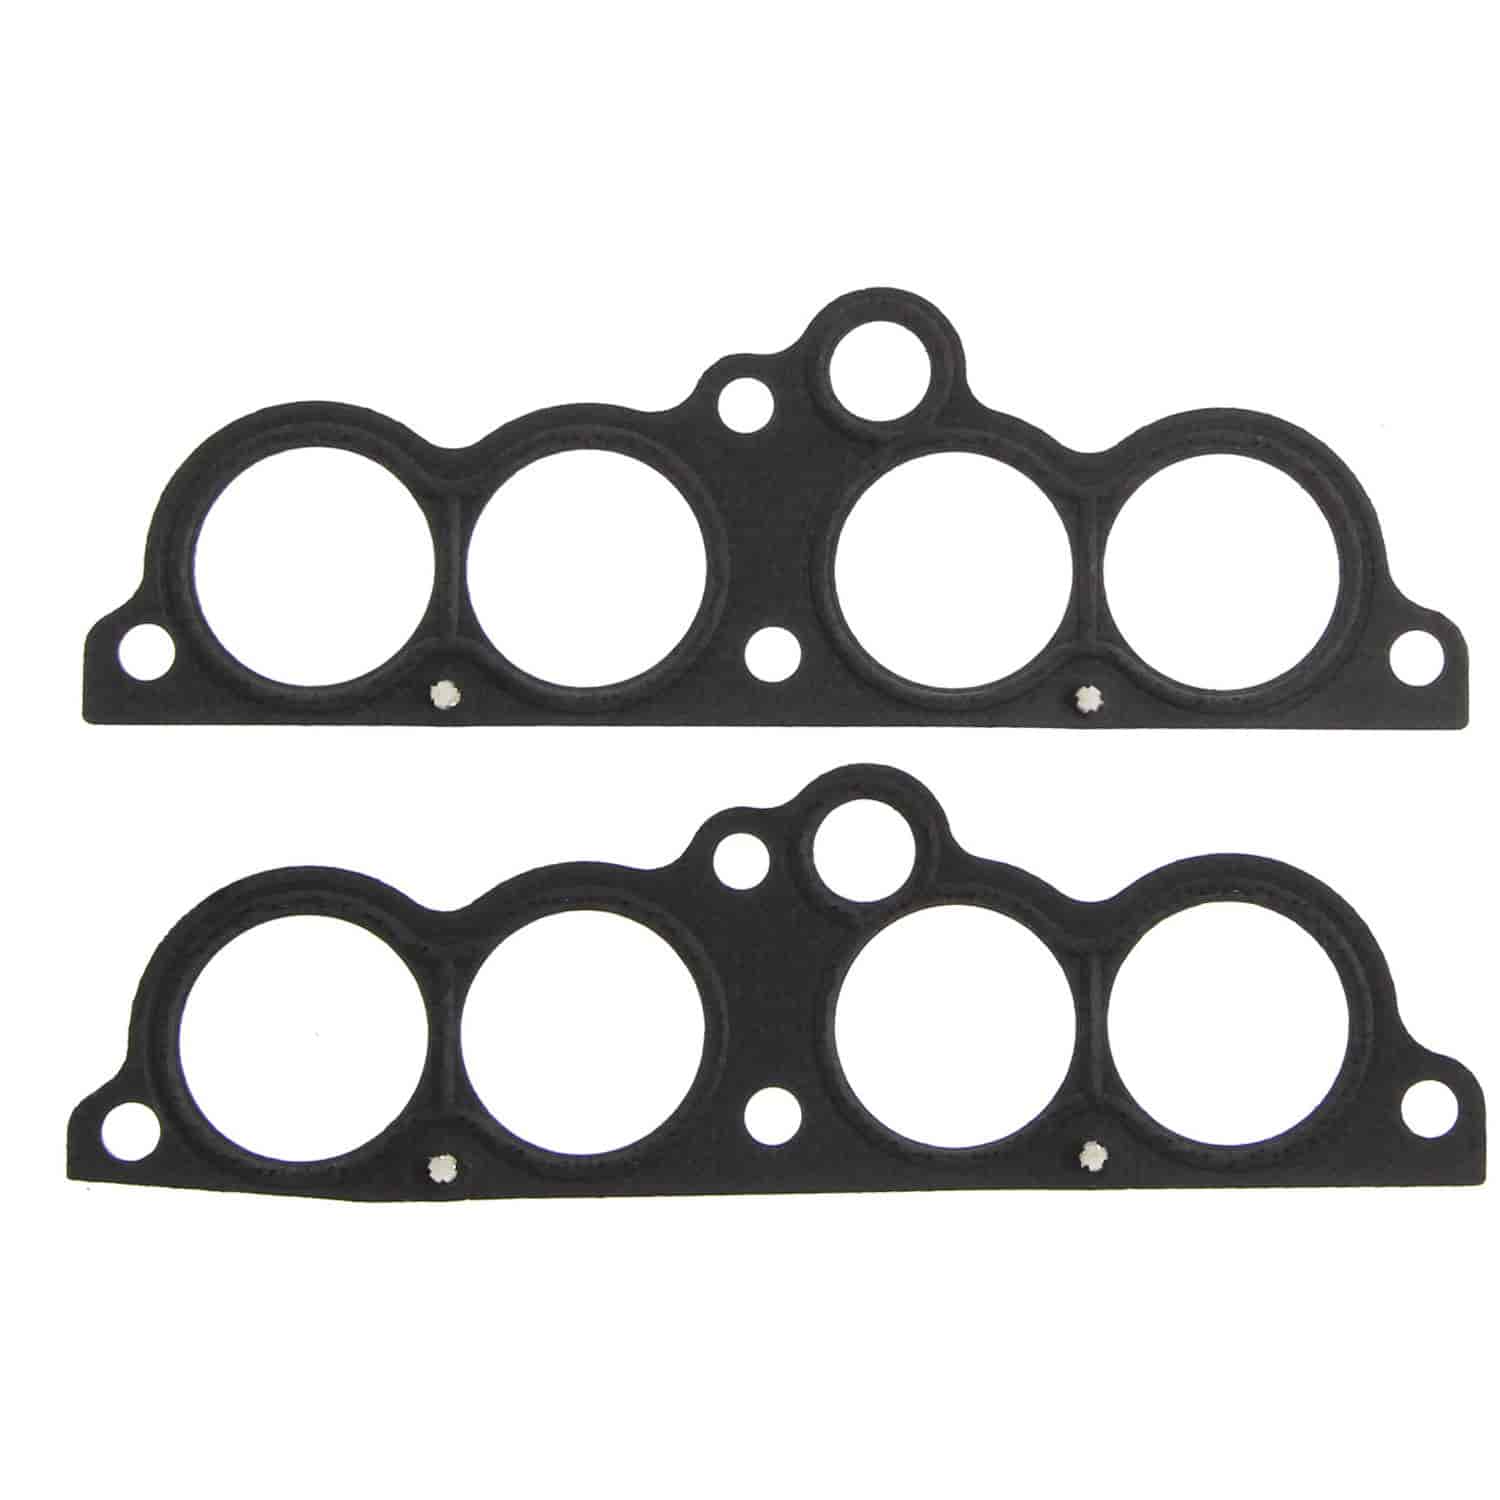 Fuel Injection Plenum Gasket 1985-1992 Small Block Chevy